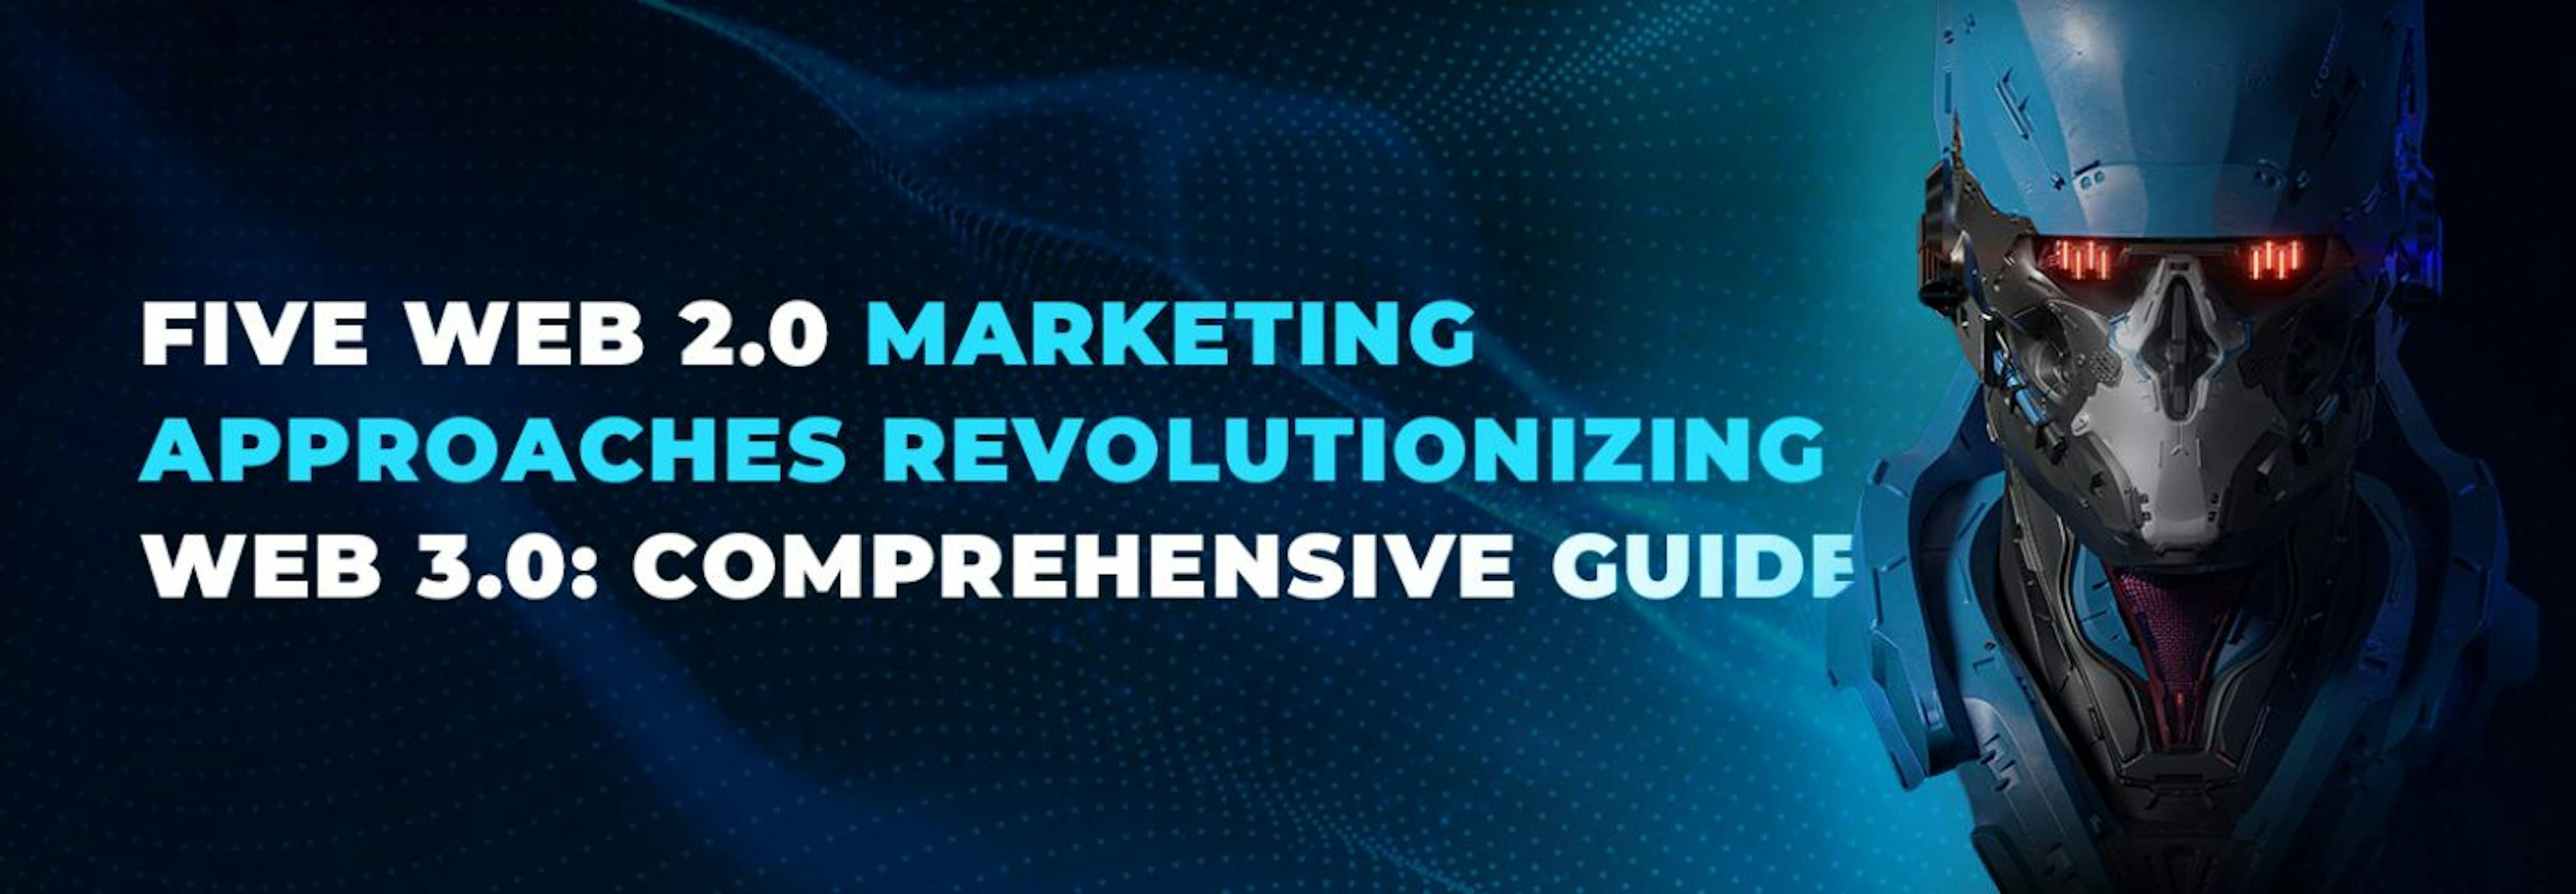 featured image - Five Web 2.0 Marketing Approaches Revolutionizing Web 3.0: A Comprehensive Guide